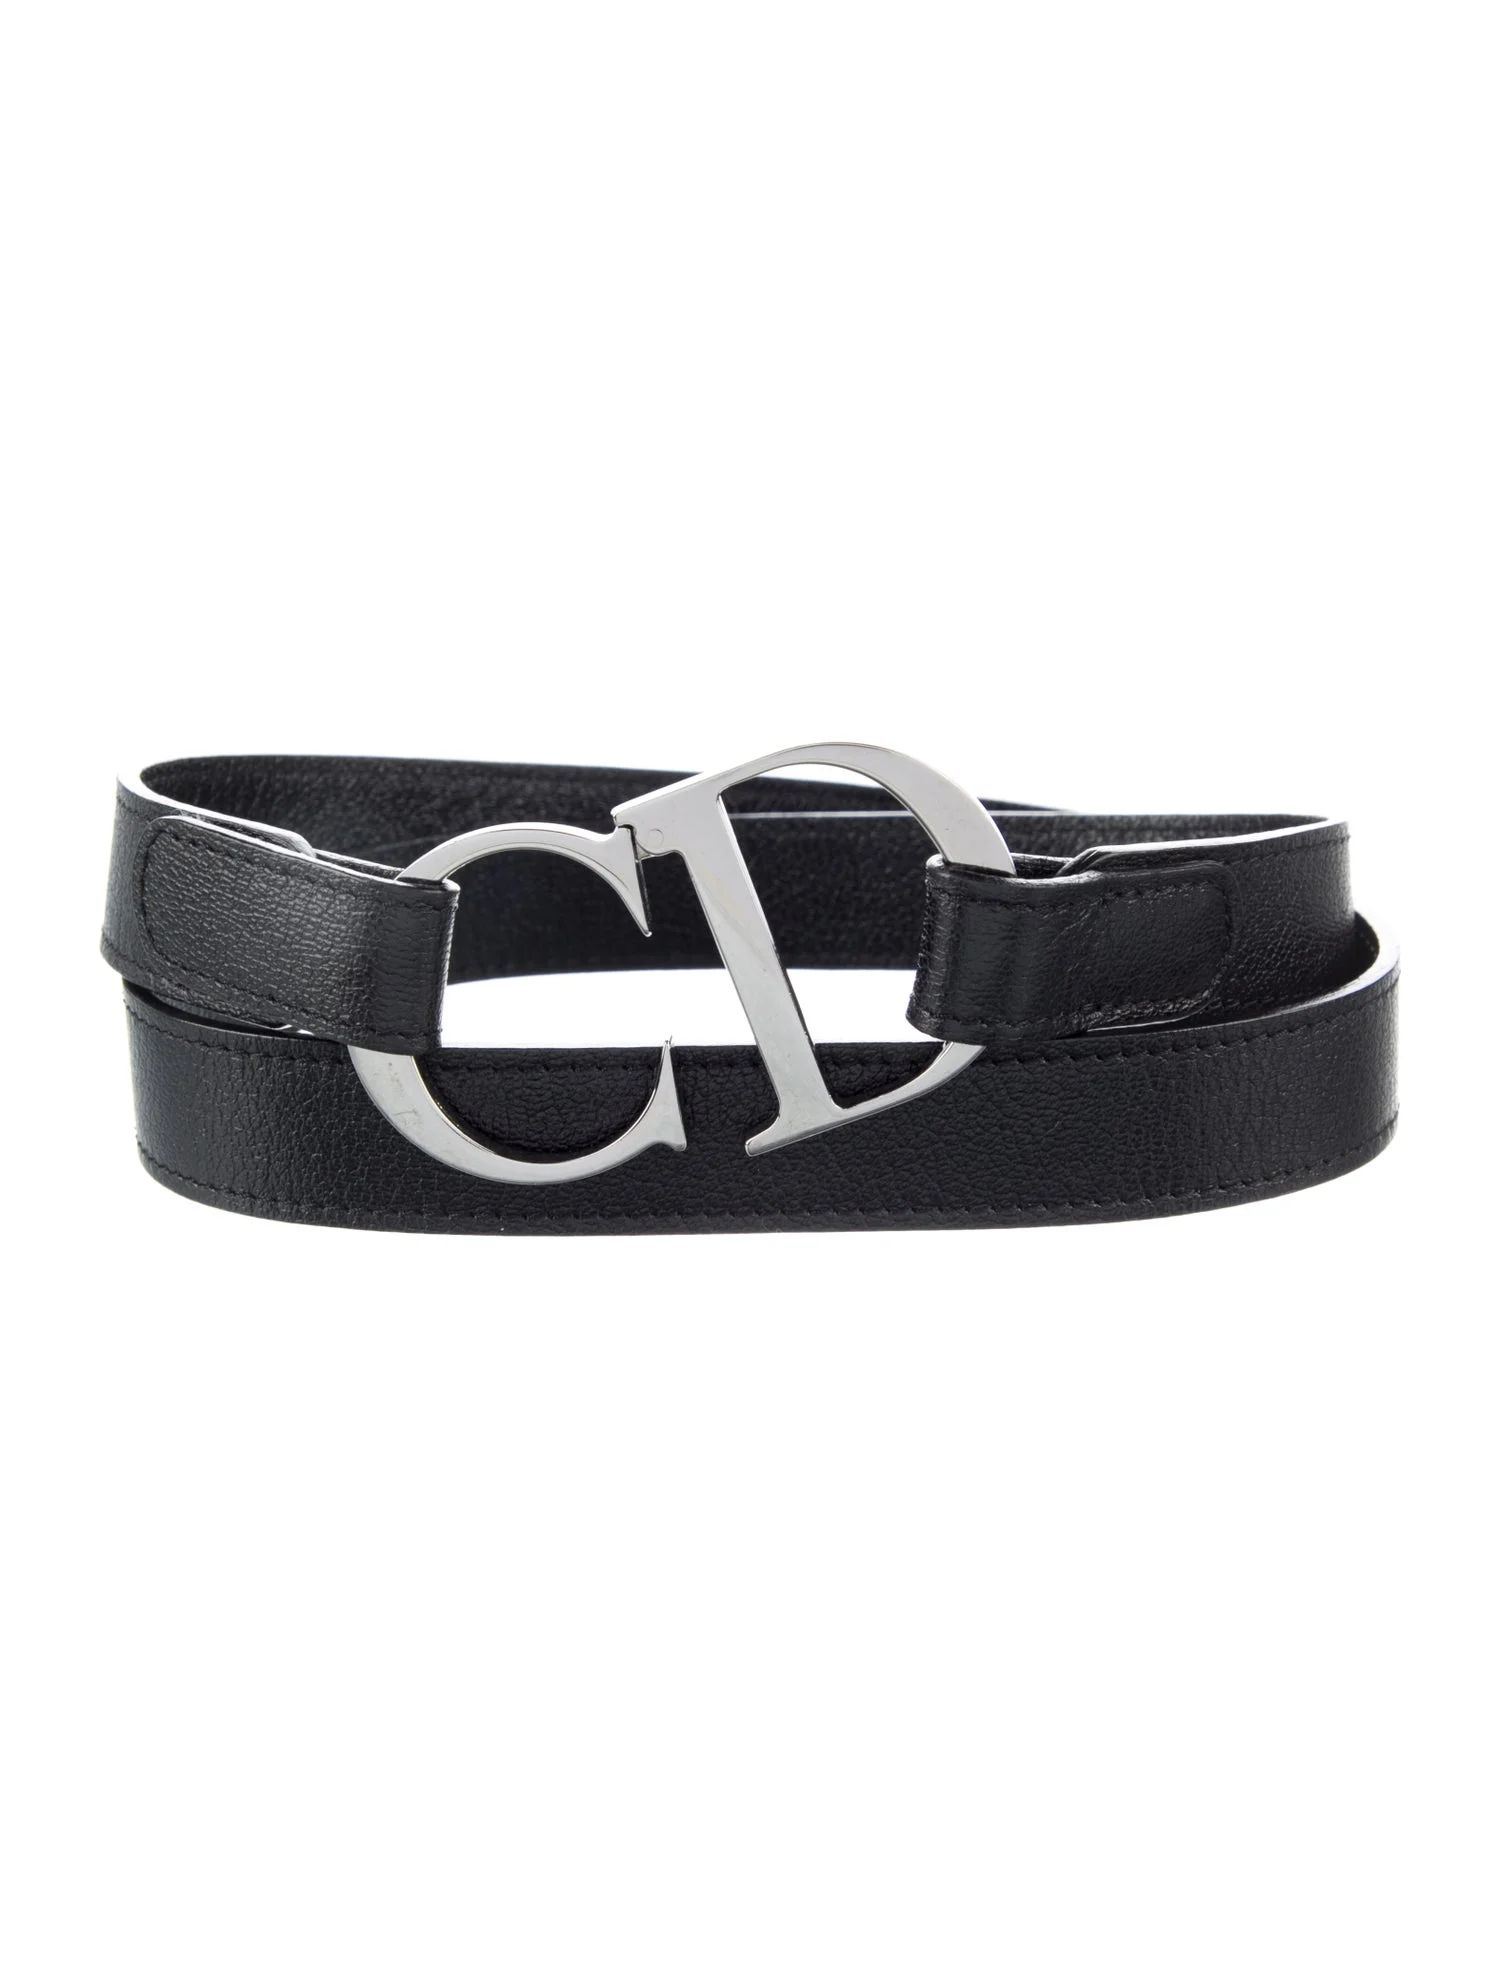 Wide Leather Belt | The RealReal